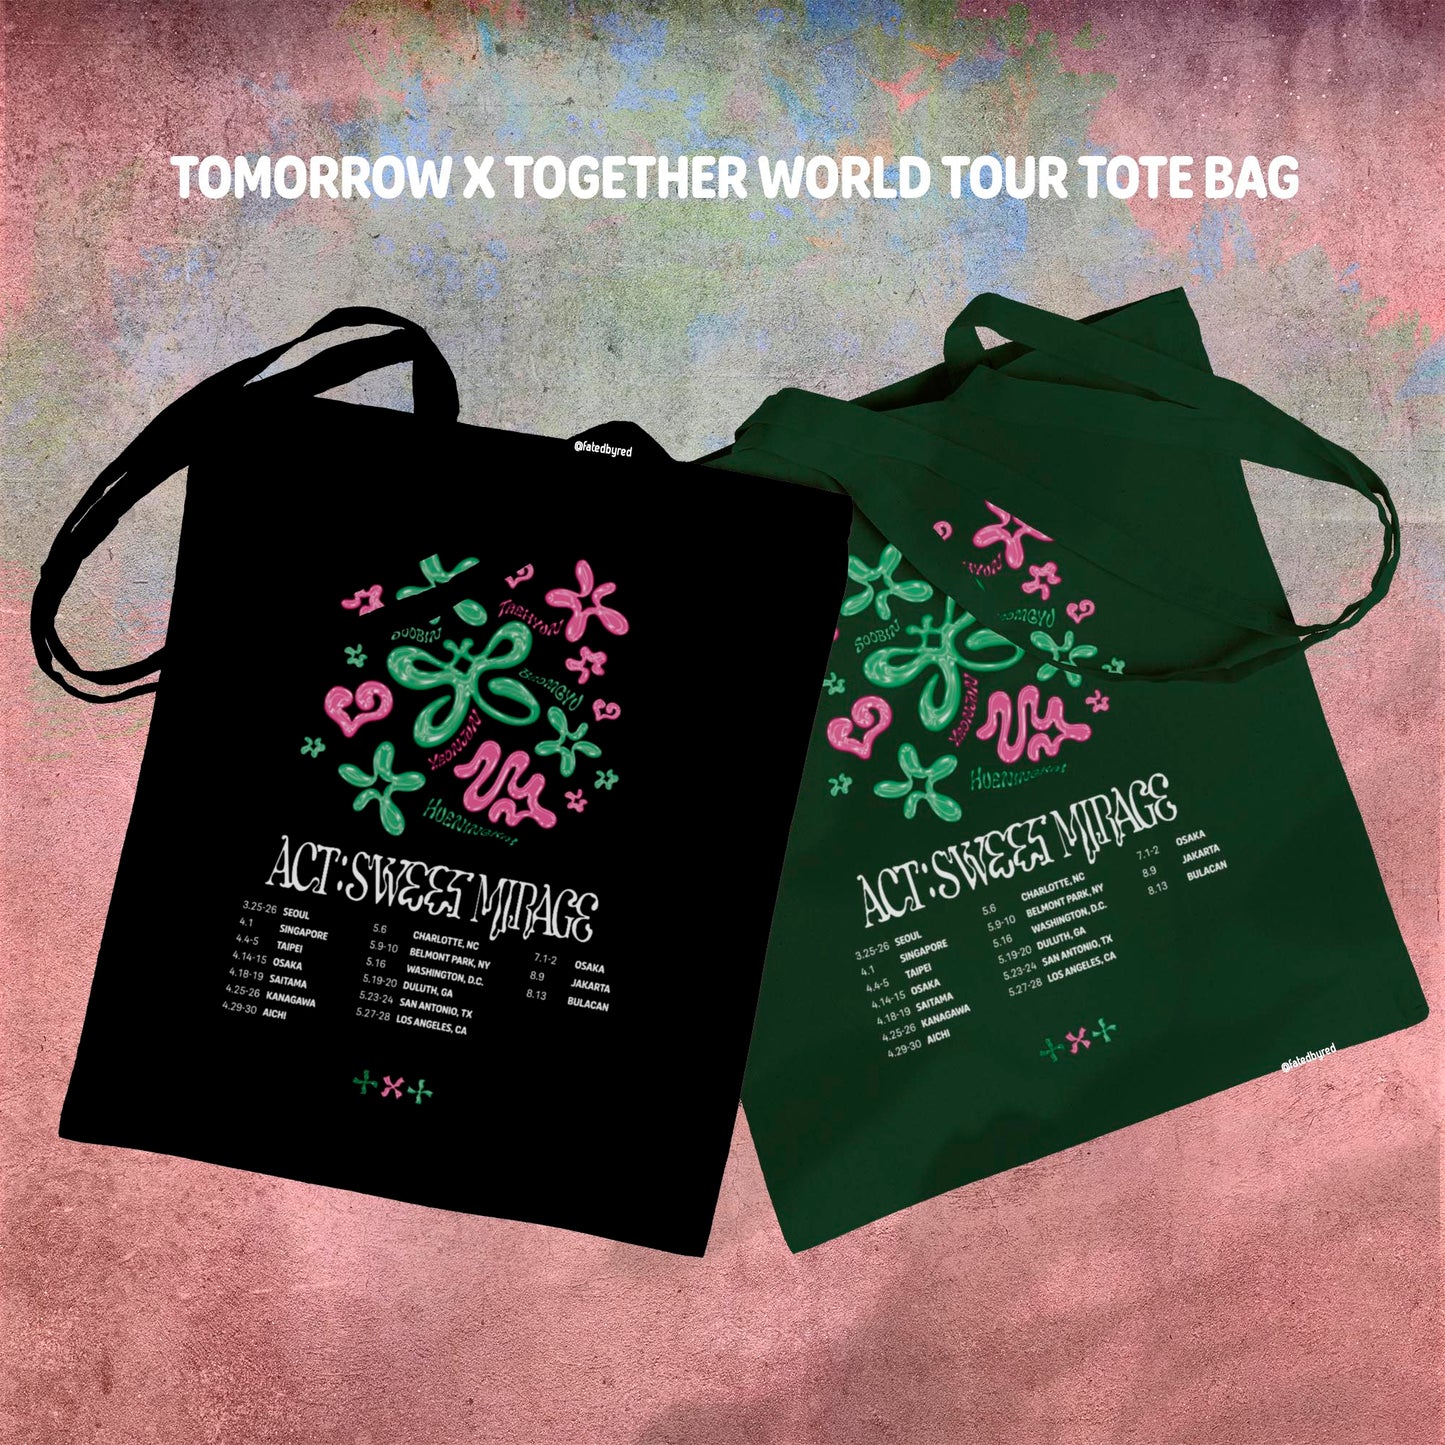 Tomorrow x Together TXT Sweet Mirage Concert Tour Tote Bag